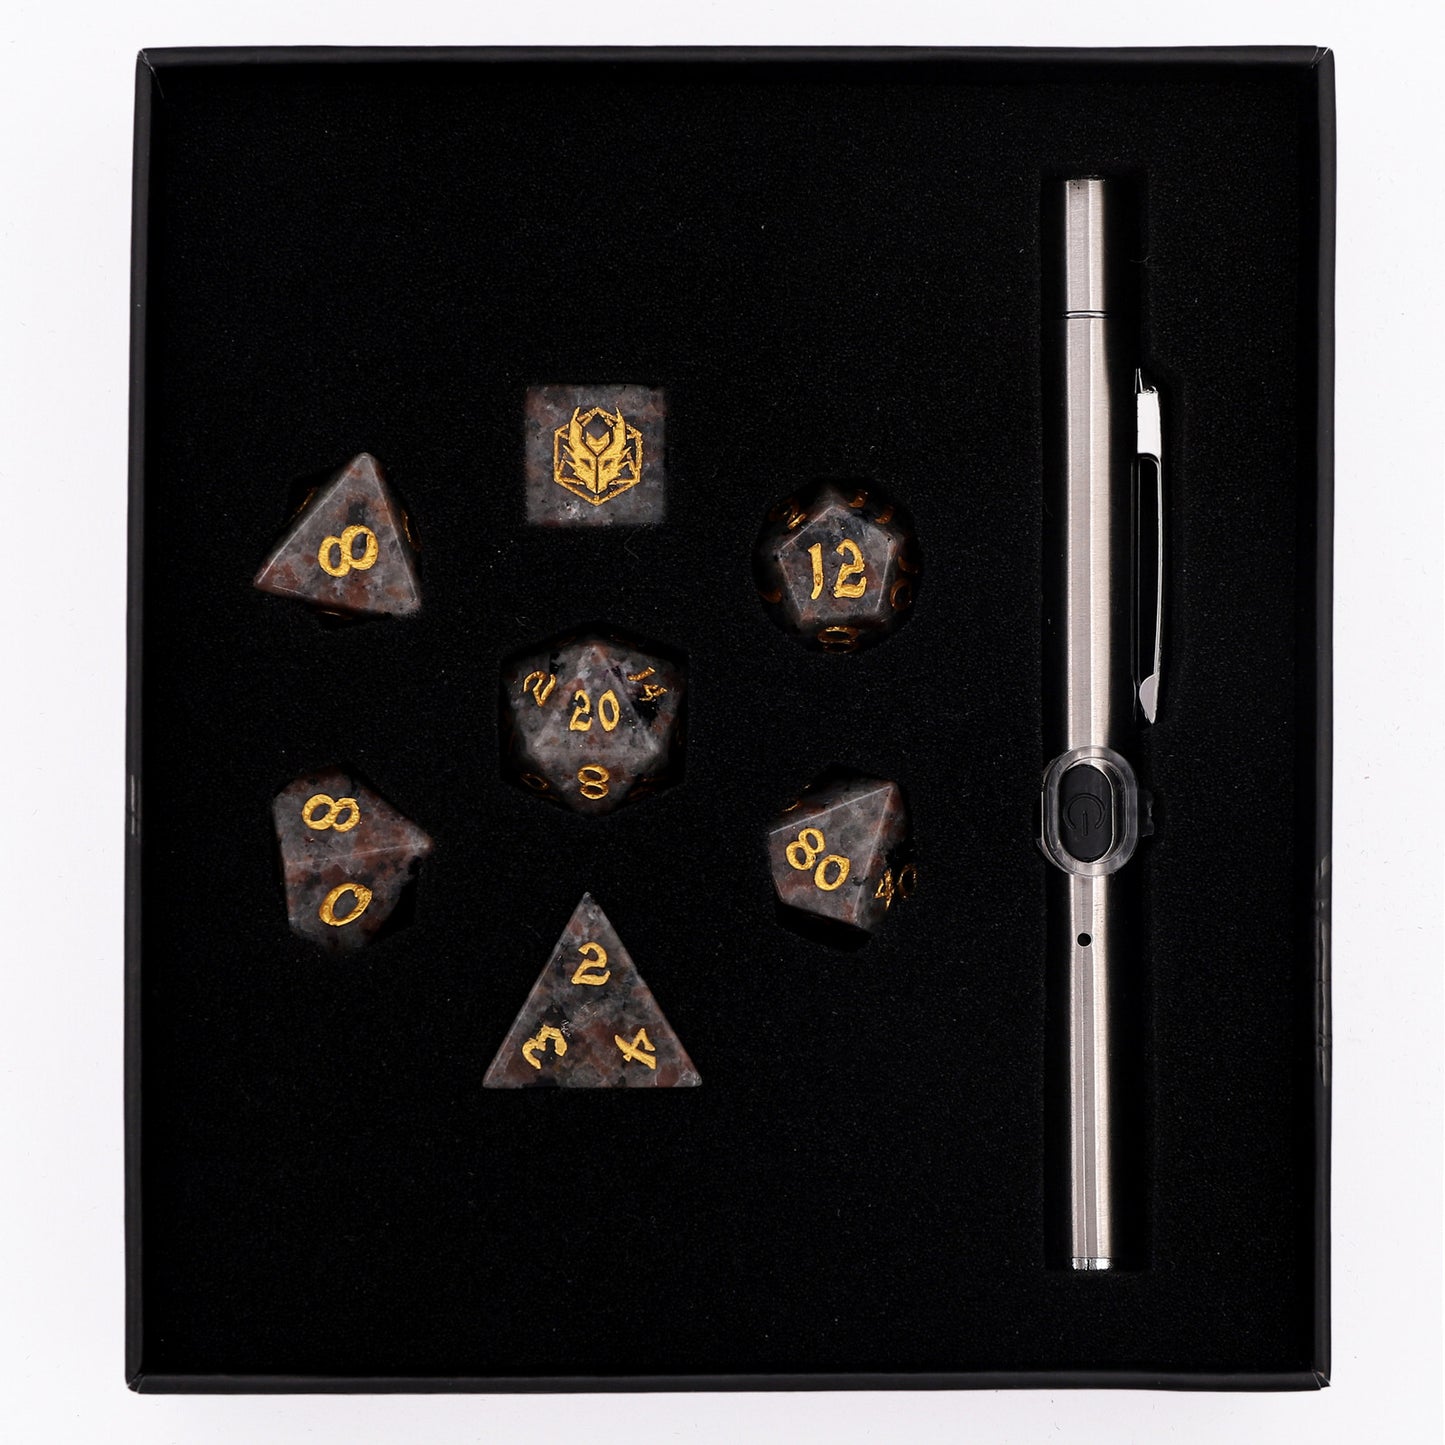 Dragon's Hoard Gemstone Polyhedral Dice Set-Yooperlite with a UV Pen in Gift box